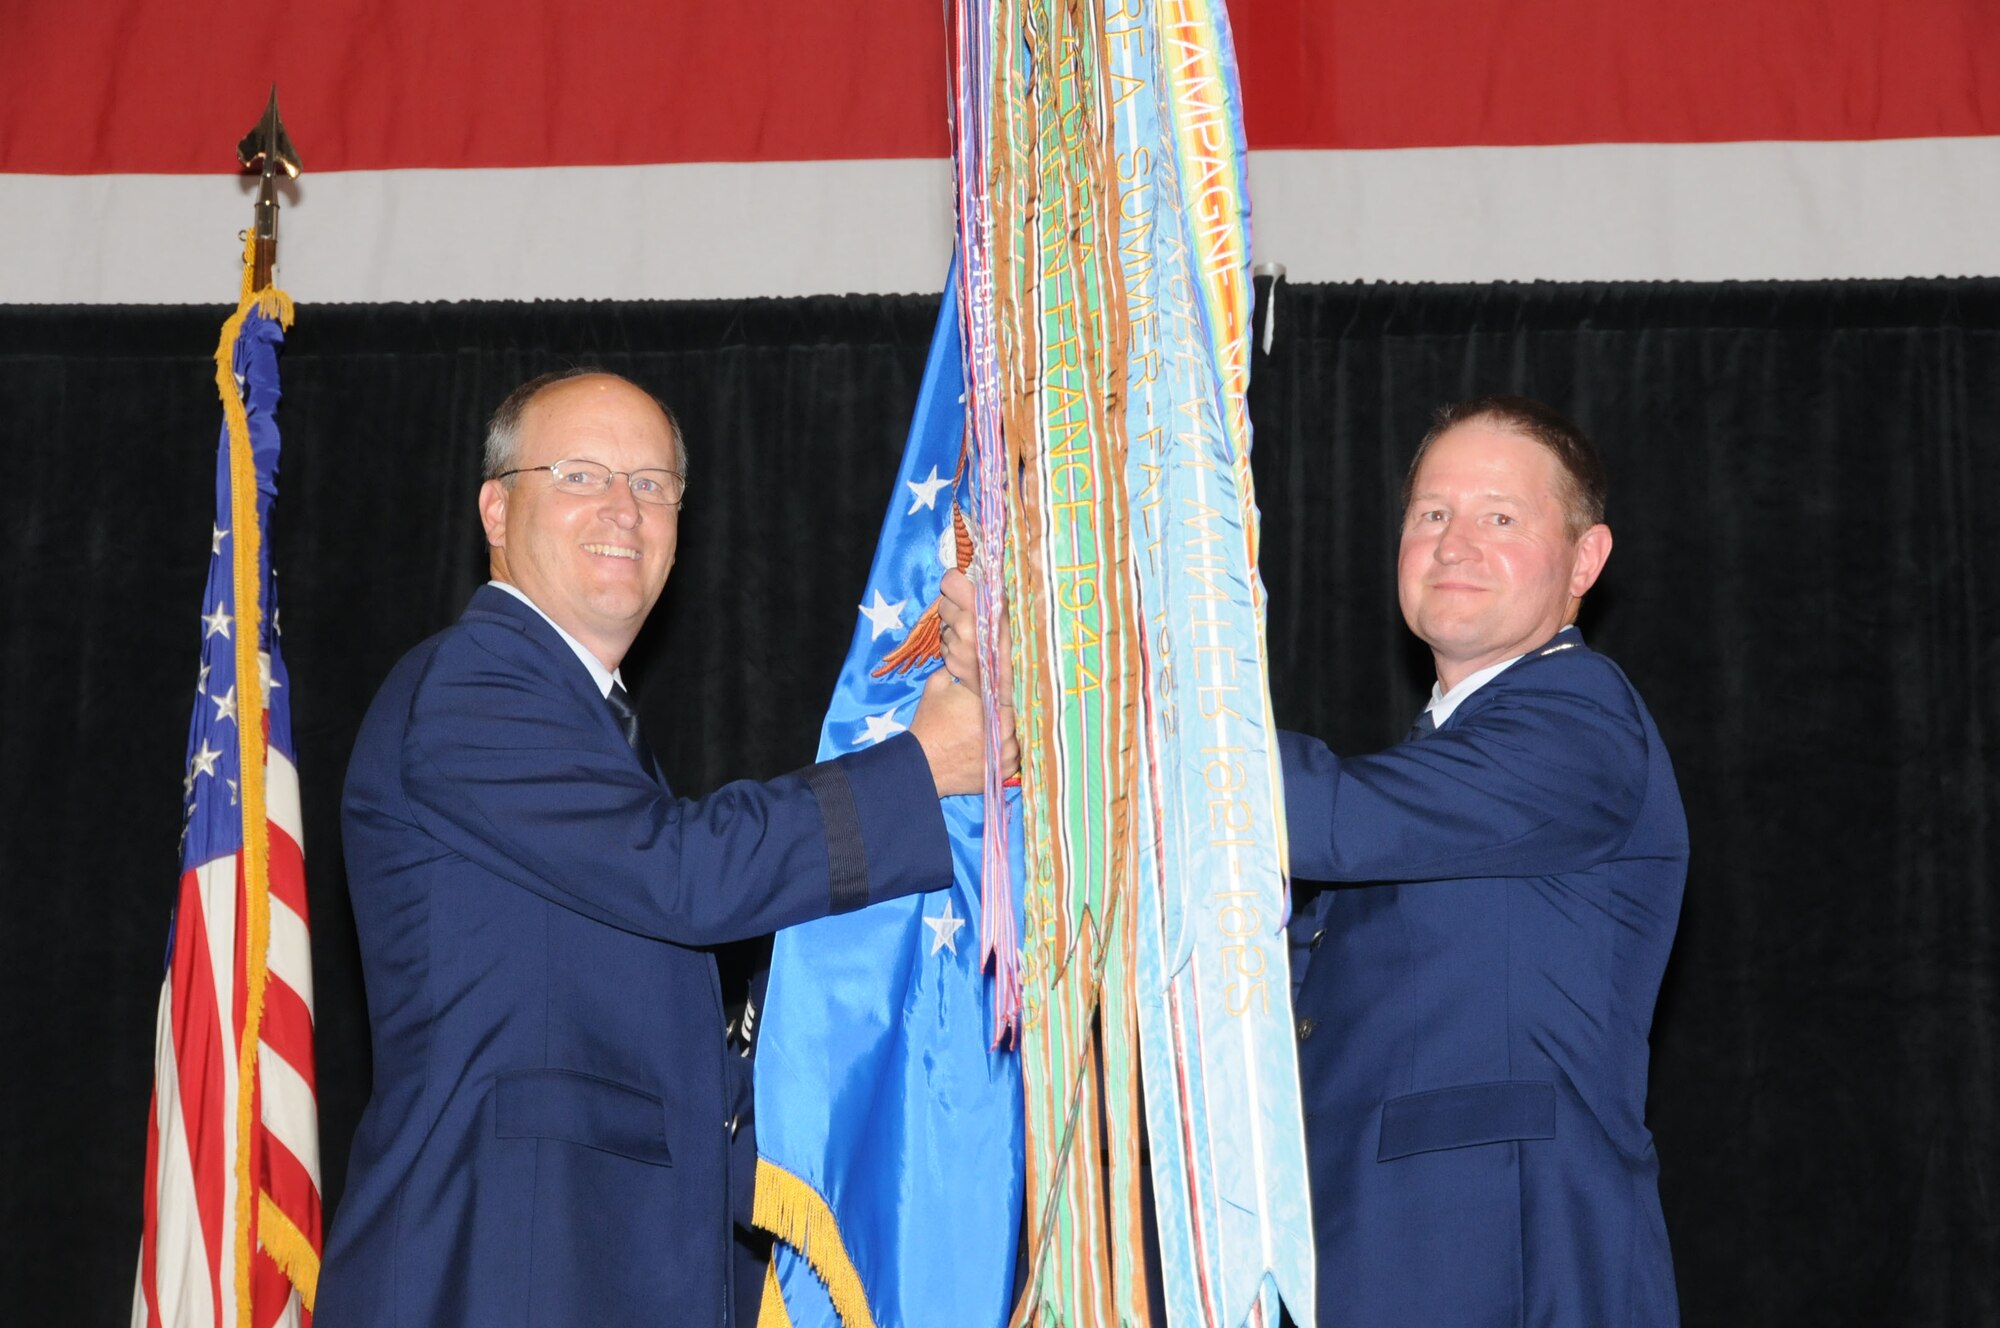 Col. Steve Eggensperger(right), incoming 189th Airlift Wing commander, accepts the wing flag from Brig. Gen. Dwight Balch, Arkansas Air National Guard commander, and as such, command of the unit May 15, 2011, at Little Rock Air Force Base, Ark. The 189th AW is equipped with C-130H Hercules aircraft and conducts entry-level loadmaster and flight engineer training through the Enlisted Aircrew Academic School, and provides initial and instructor aircrew qualification training for the Department of Defense and more than 20 allied nations. (U.S. Air Force photo/Master Sgt. Dianna Seerey)